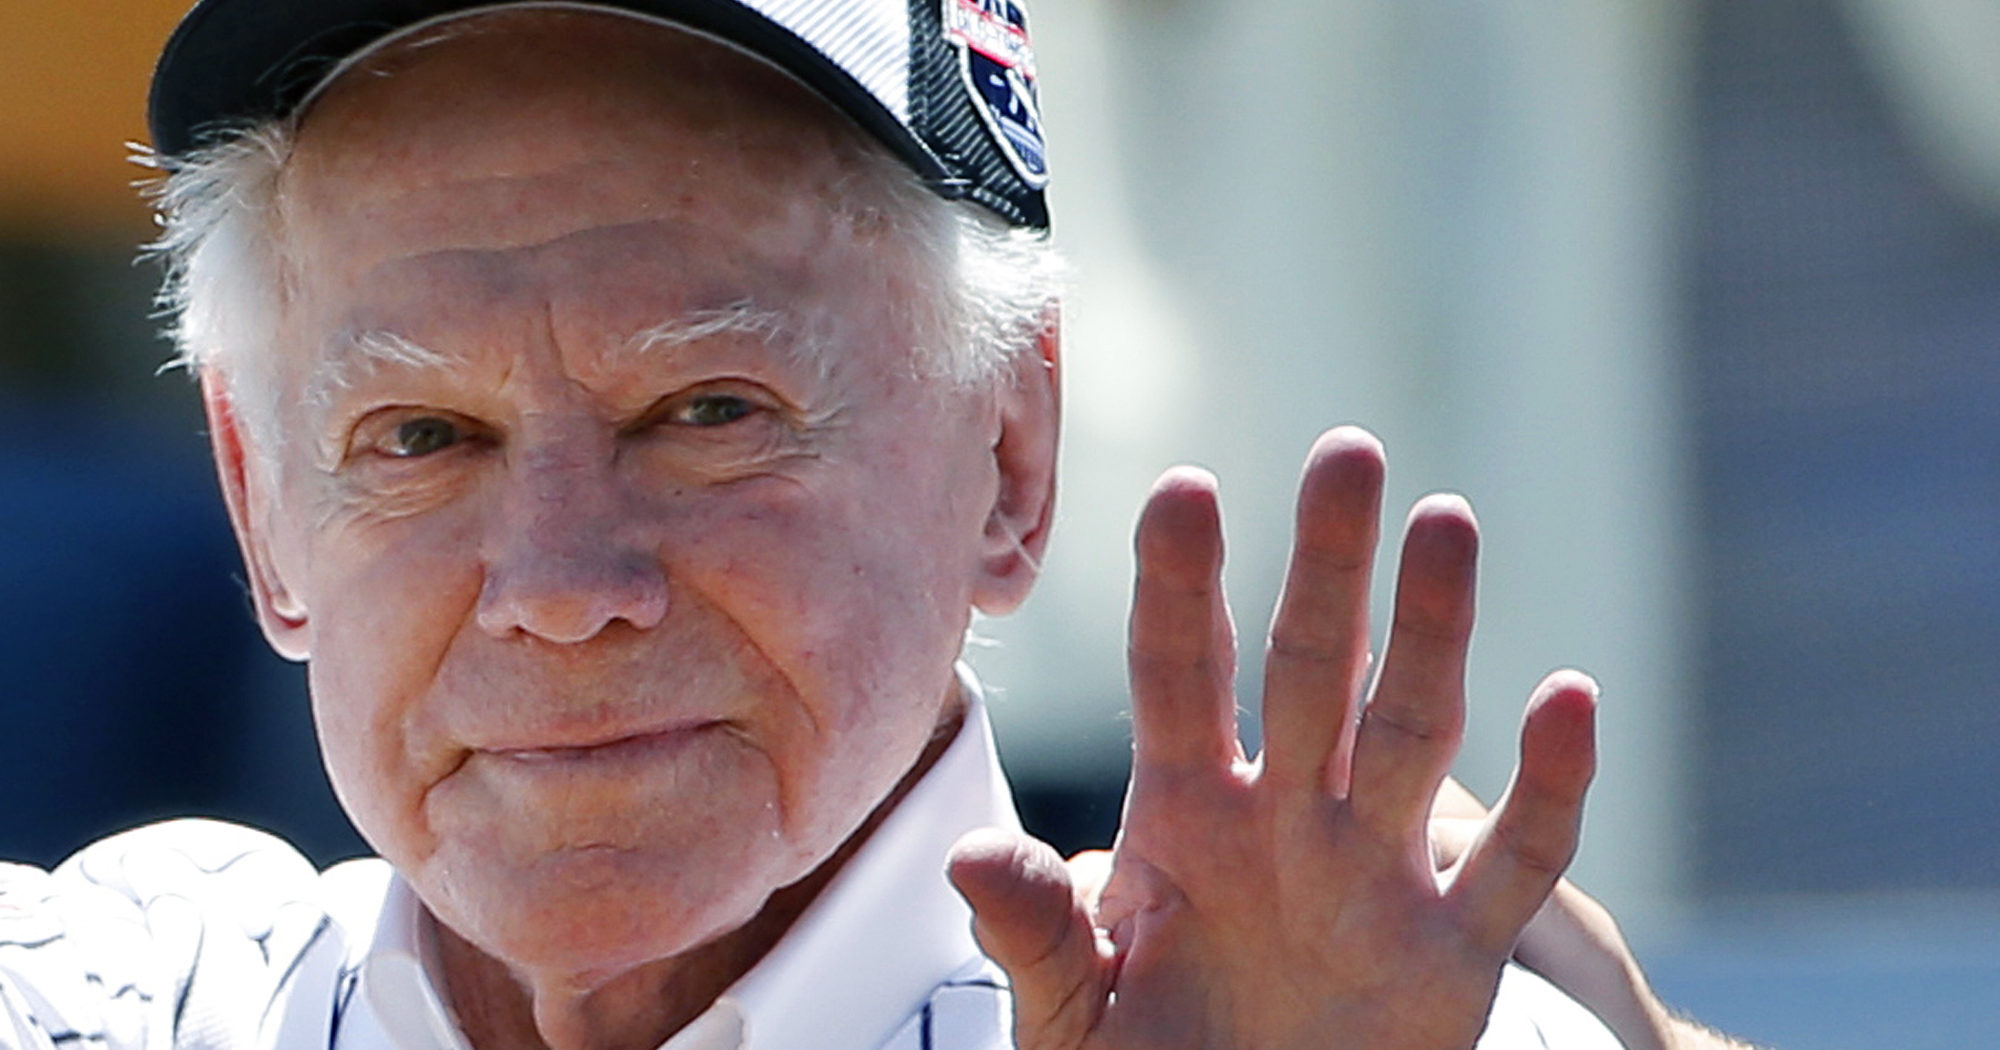 In this June 12, 2016, file photo, former New York Yankees pitcher Whitey Ford waves to fans from outside the dugout at the Yankees' annual Old Timers Day baseball game in New York. Ford died at his Long Island home on Oct. 8, 2020.